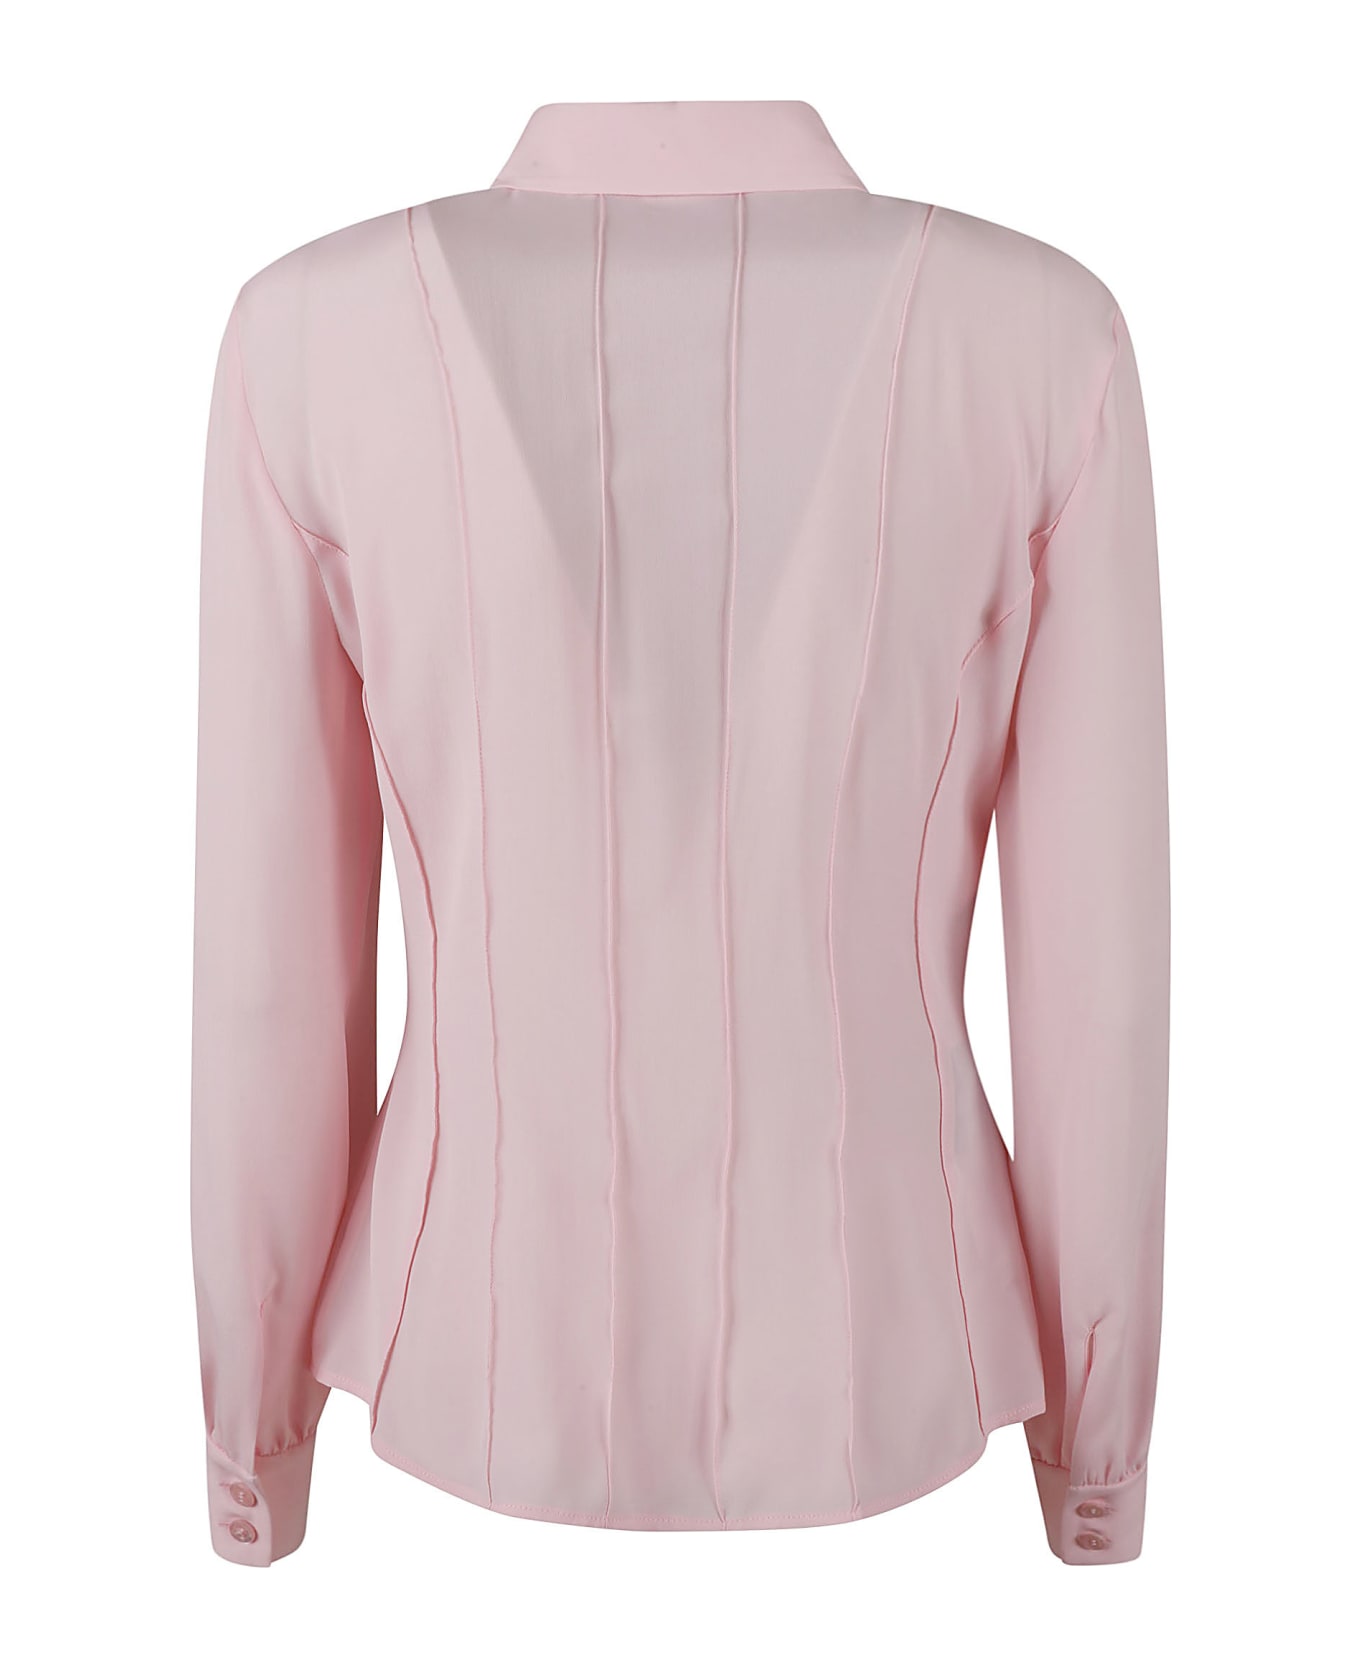 Boutique Moschino Pleated Shirt - Pink